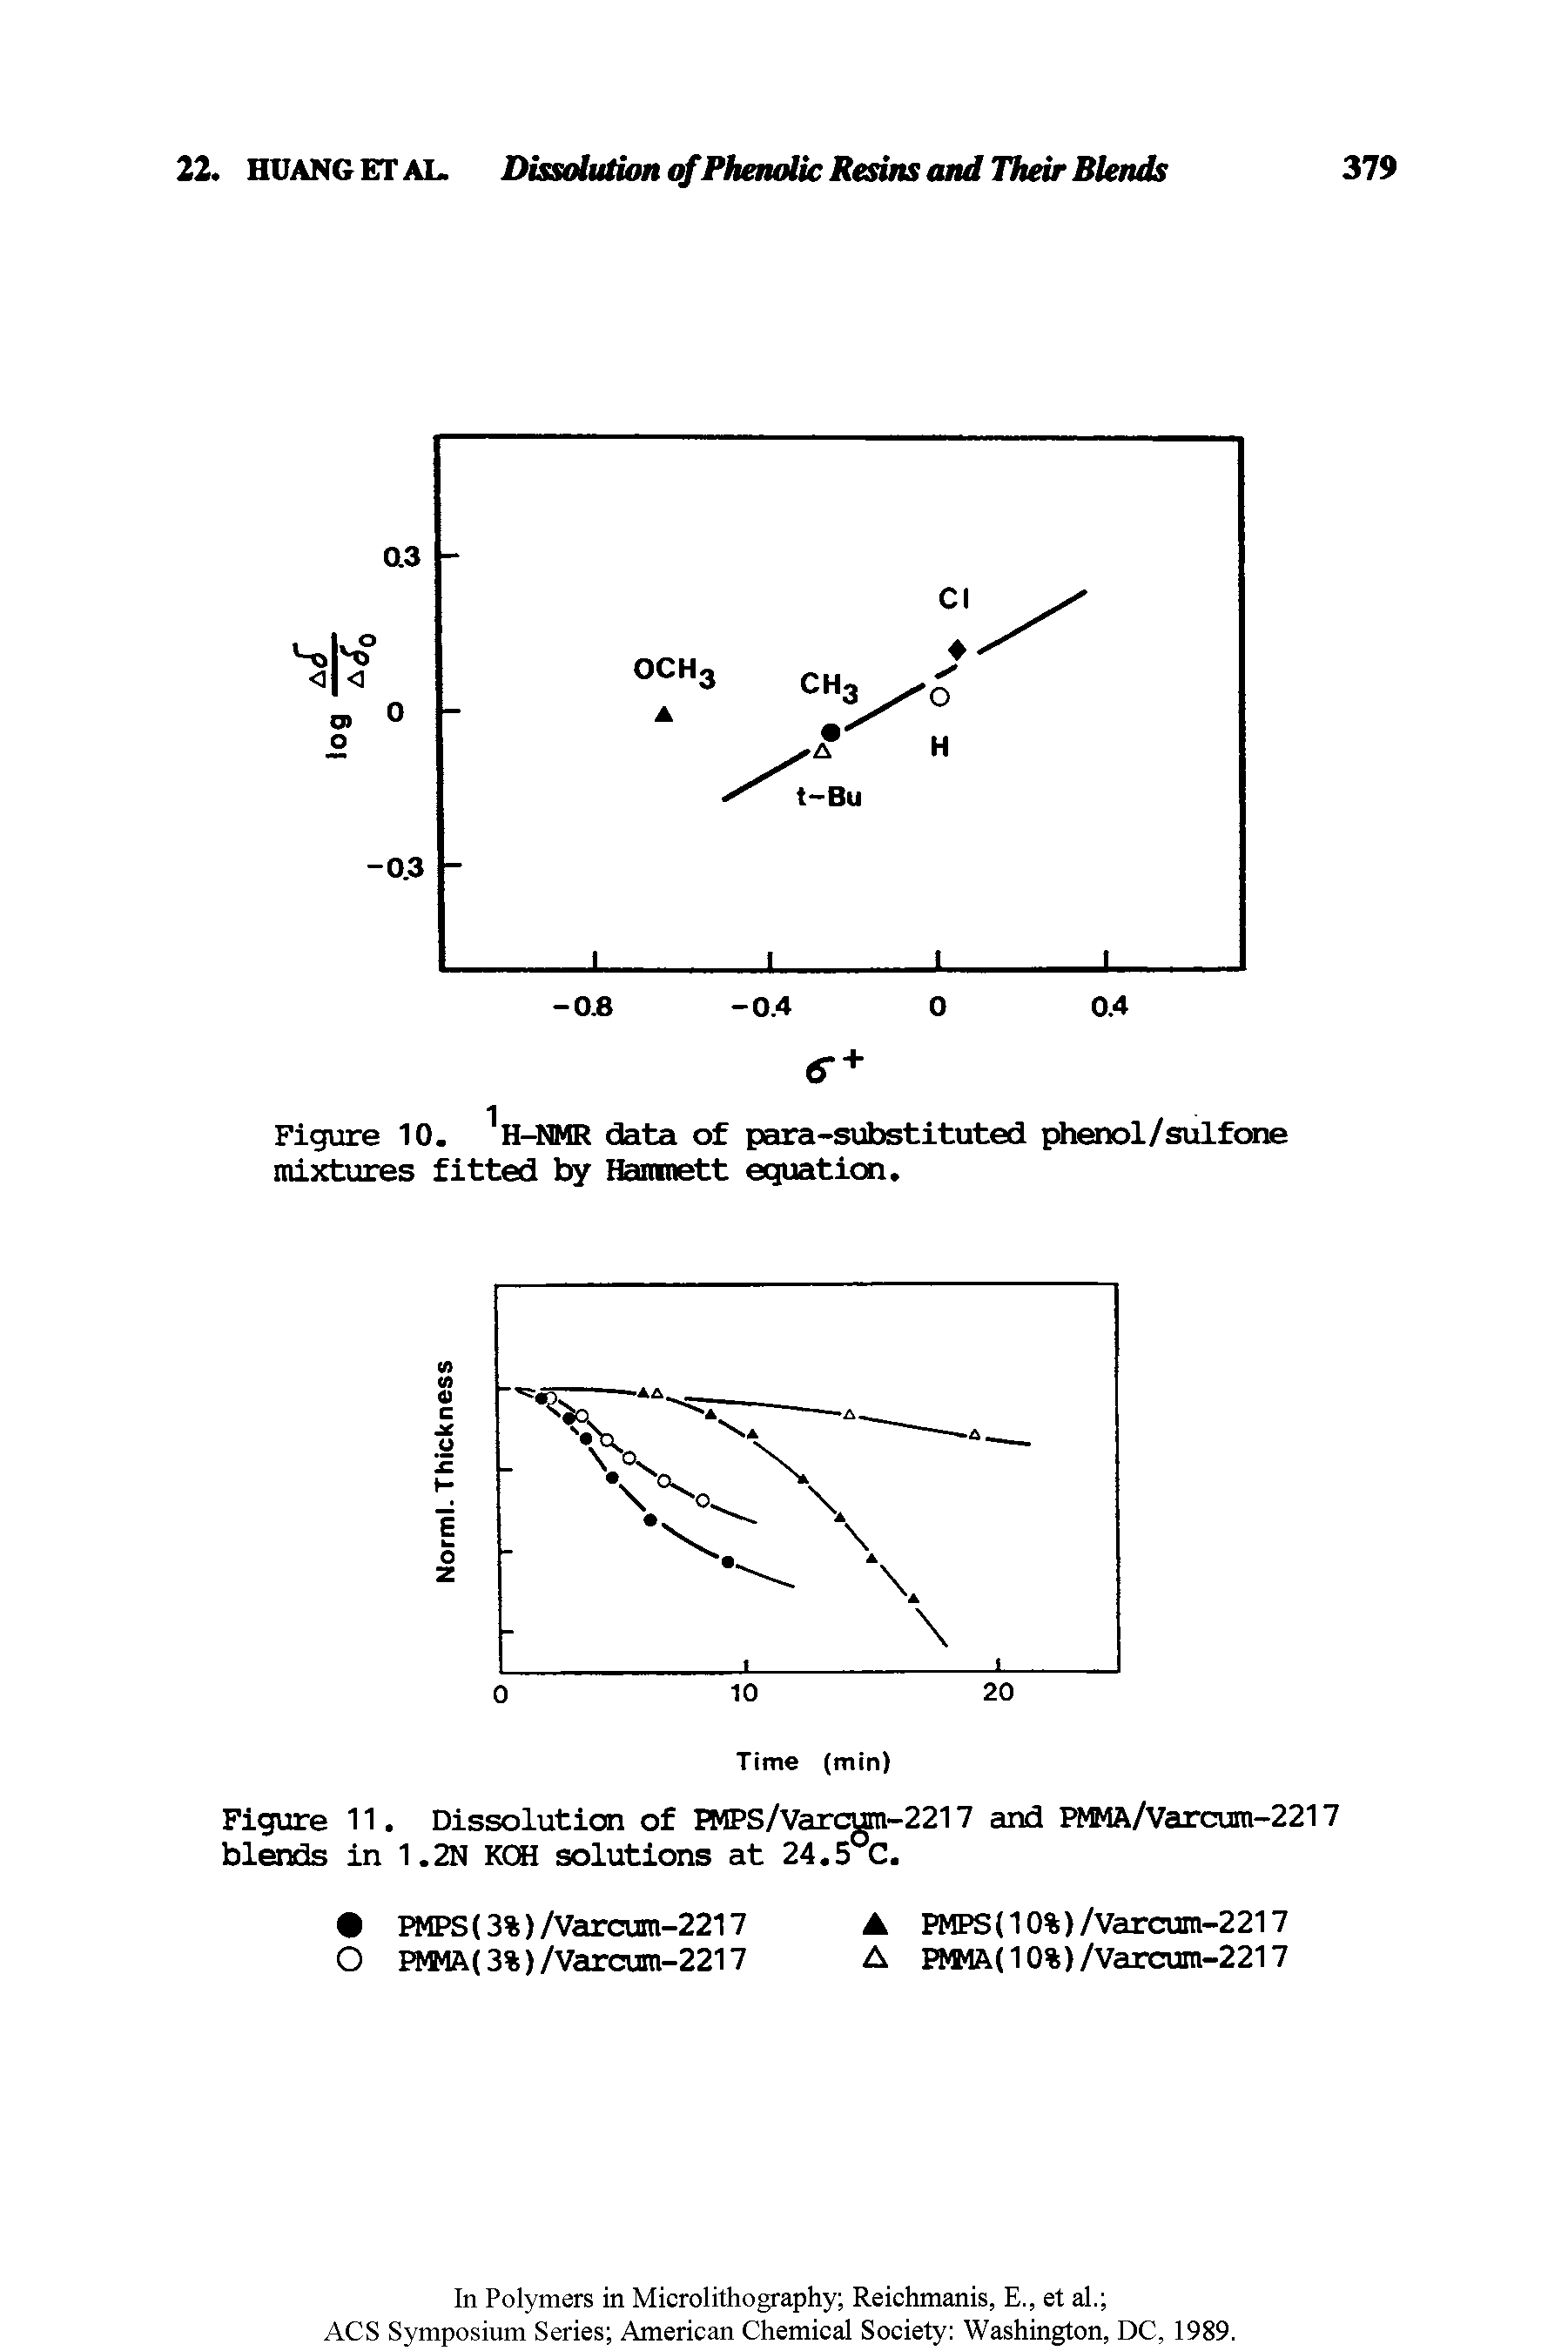 Figure 10. 1H-NMR data of para-substituted phenol/sulfone mixtures fitted by Hammett equation.